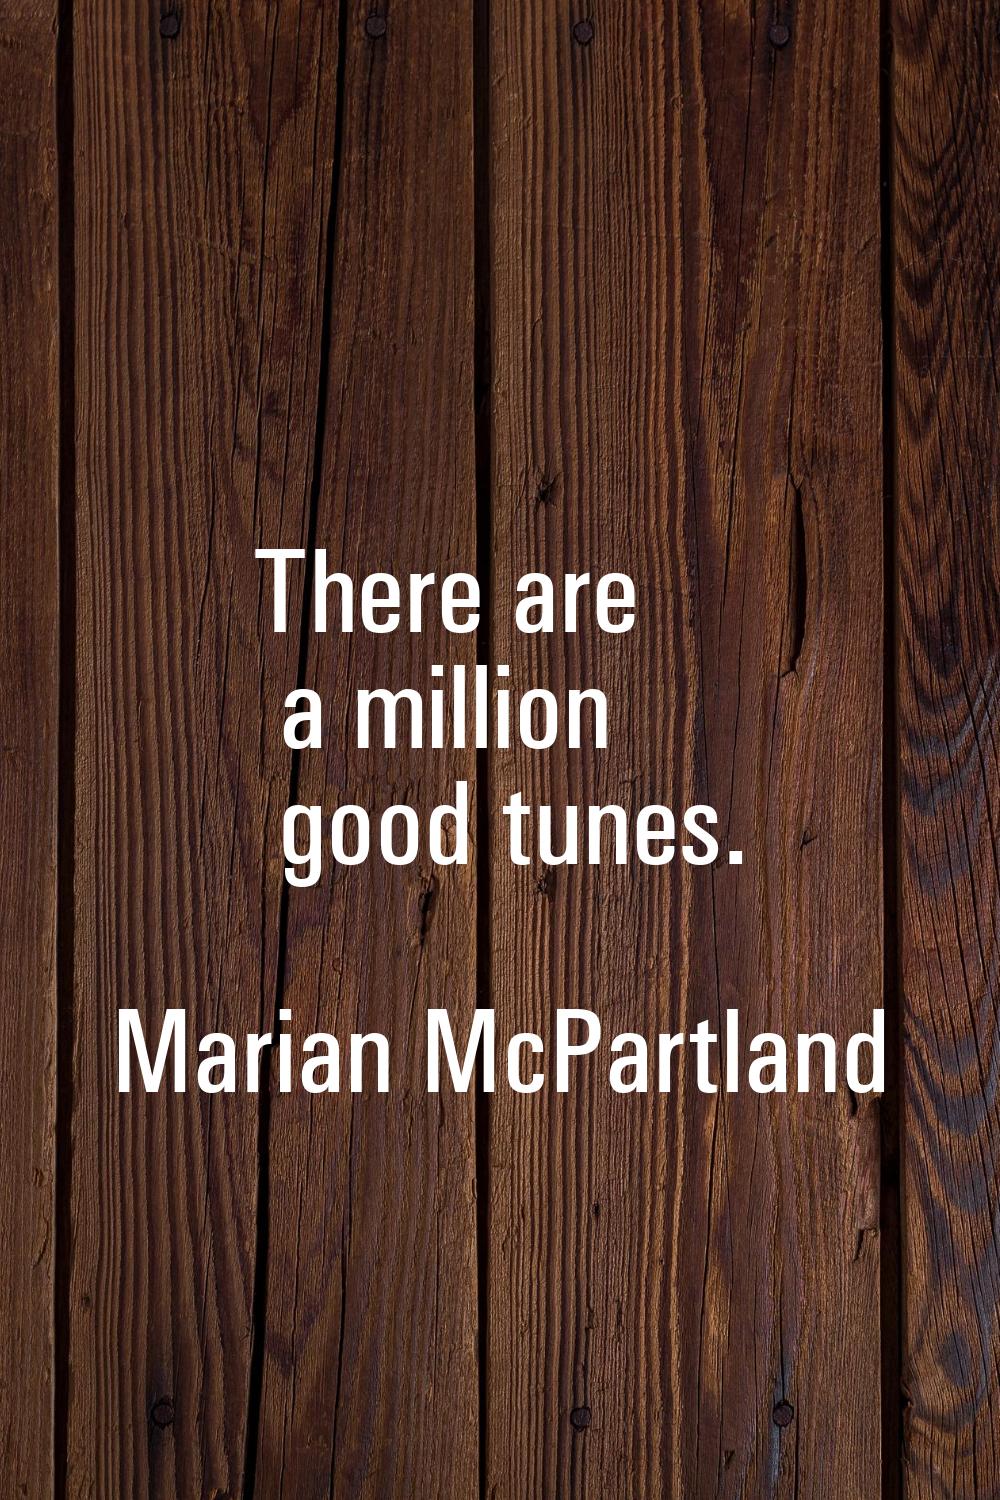 There are a million good tunes.